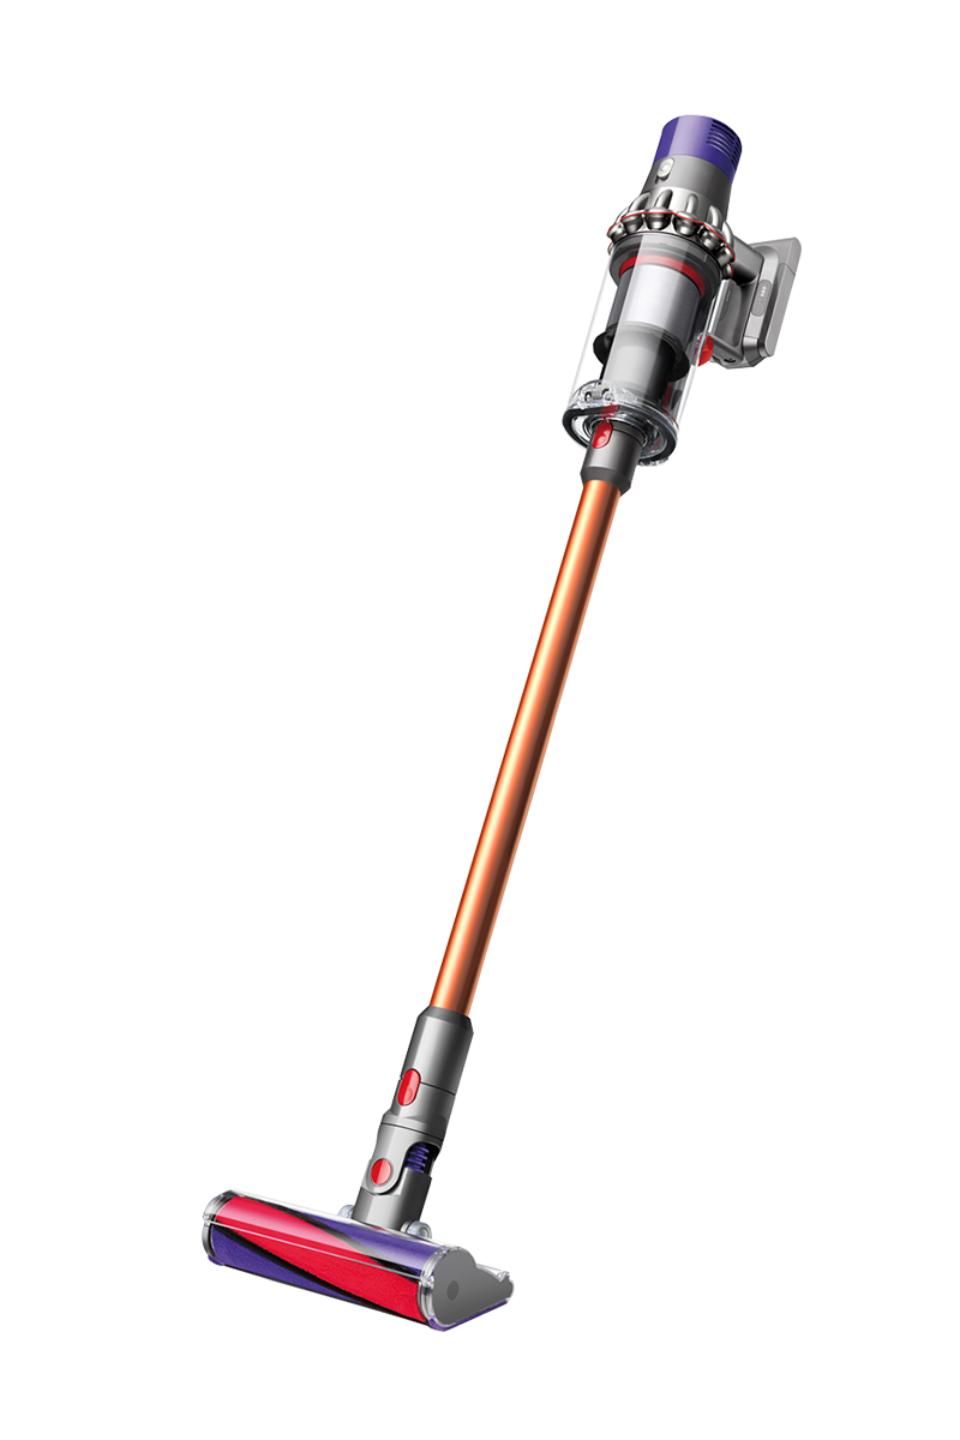 What is the Dyson and V11?